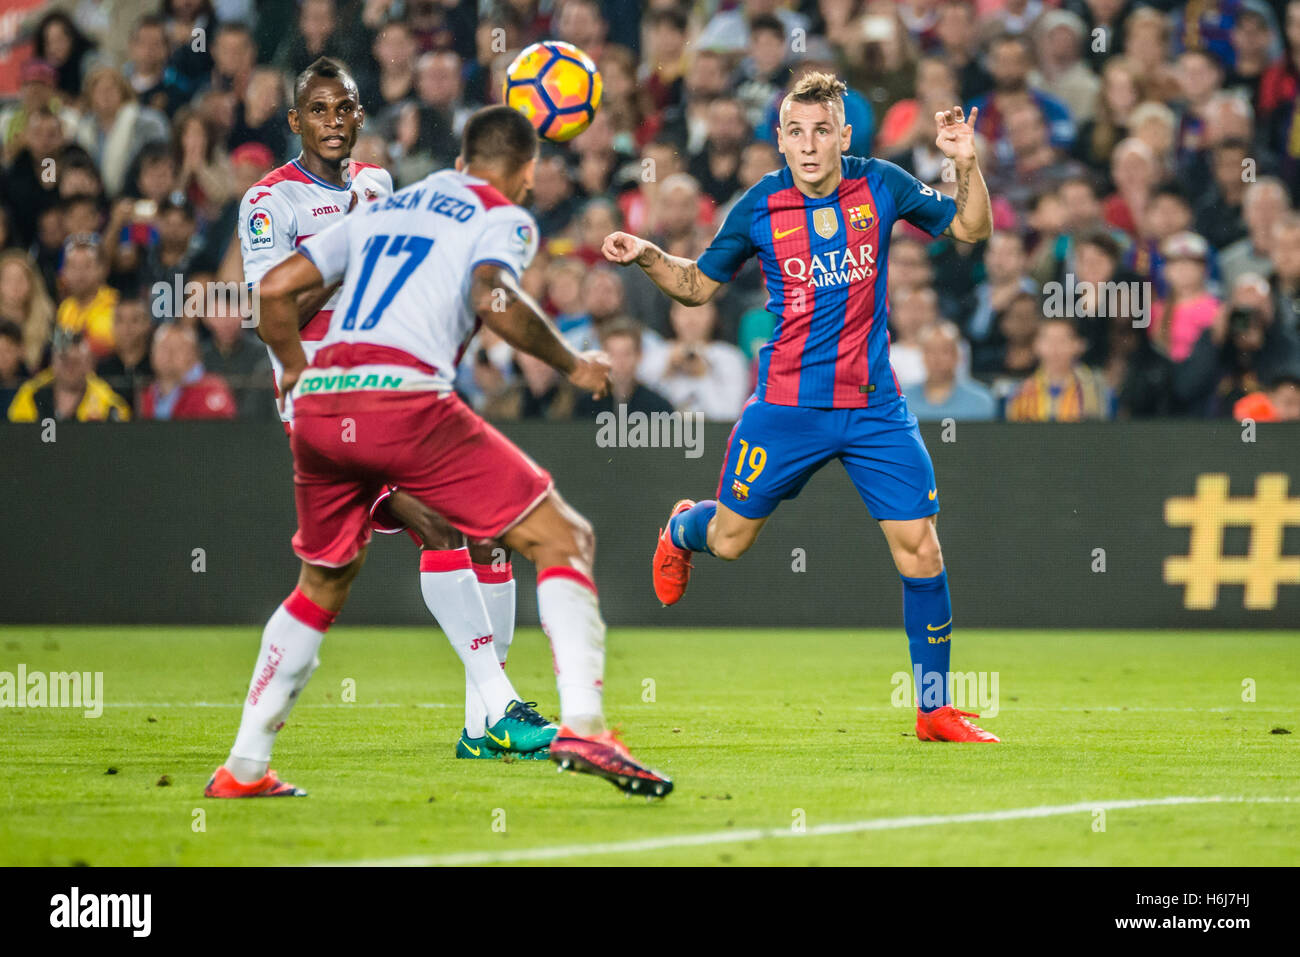 Barcelona, Catalonia, Spain. 29th Oct, 2016. FC Barcelona defender DIGNE in action in the LaLiga match between FC Barcelona and Granada CF at the Camp Nou stadium in Barcelona © Matthias Oesterle/ZUMA Wire/Alamy Live News Stock Photo